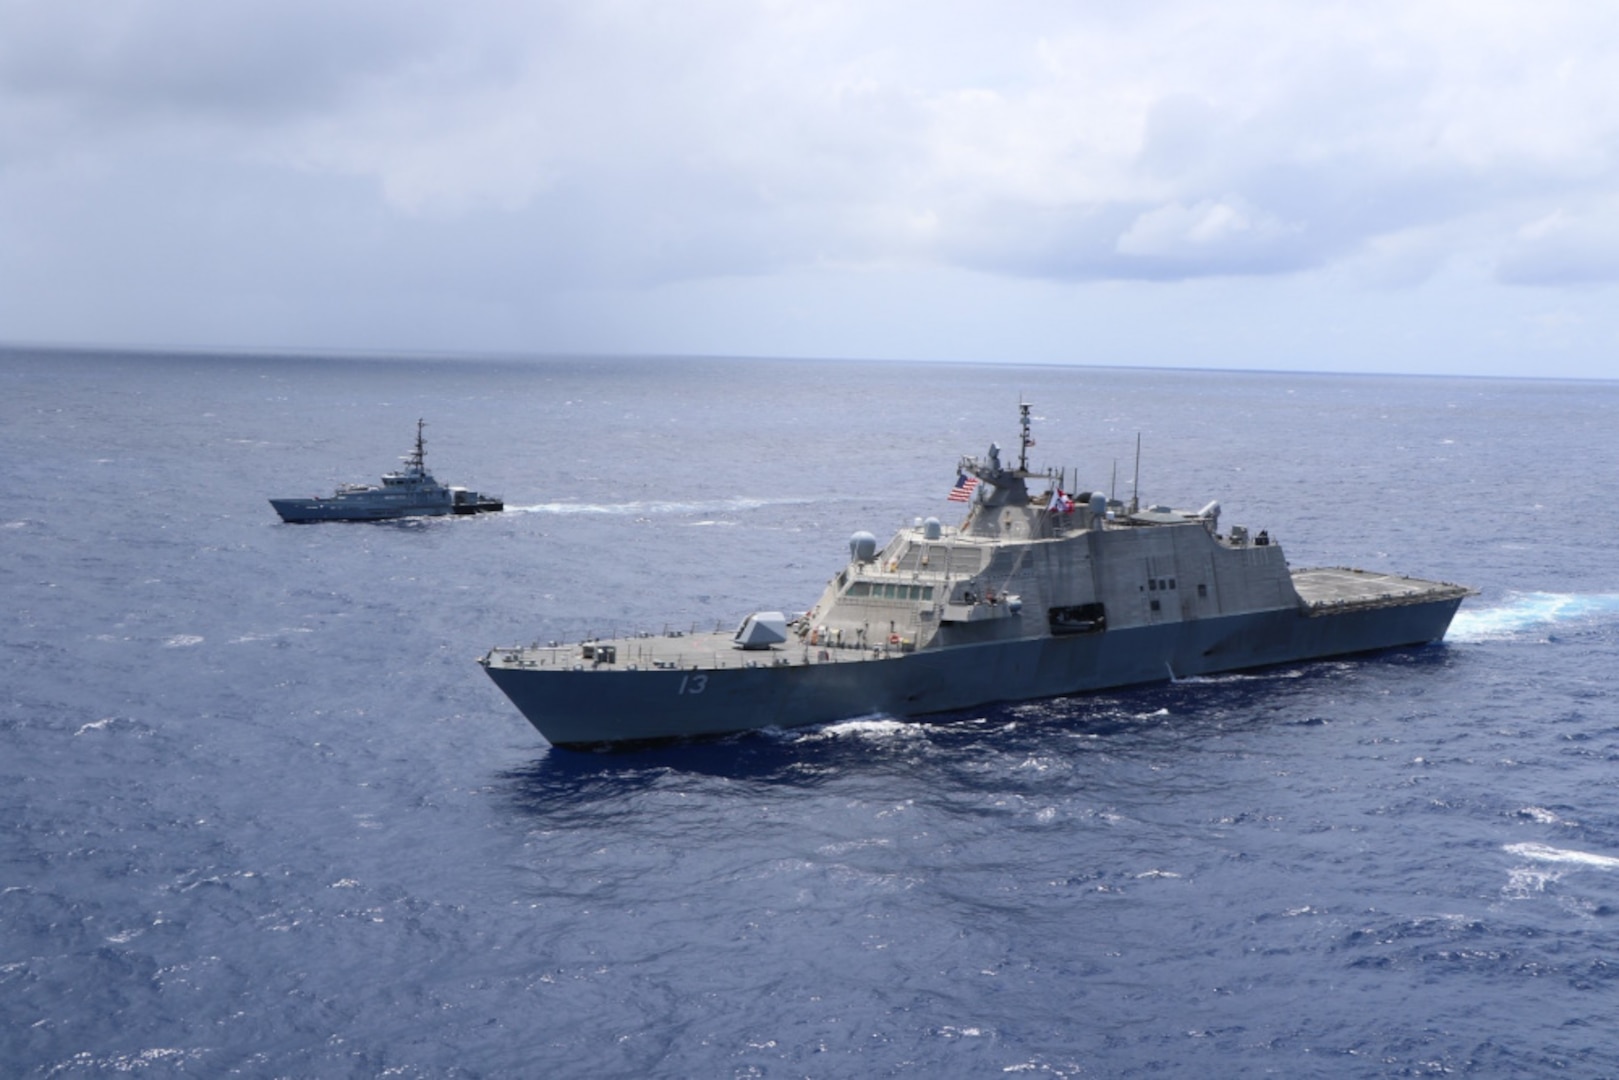 CARIBBEAN SEA – (April 9, 2021) -- The Freedom-variant littoral combat ship USS Wichita (LCS 13) and Jamaica Defence Force Coast Guard patrol vessel HMJS Cornwall sail in formation during a live-fire exercise April 9, 2021. Wichita is deployed to the U.S. 4th Fleet of operations to support Joint Interagency Task Force South’s mission, which include counter illicit drug trafficking in the Caribbean and Eastern Pacific